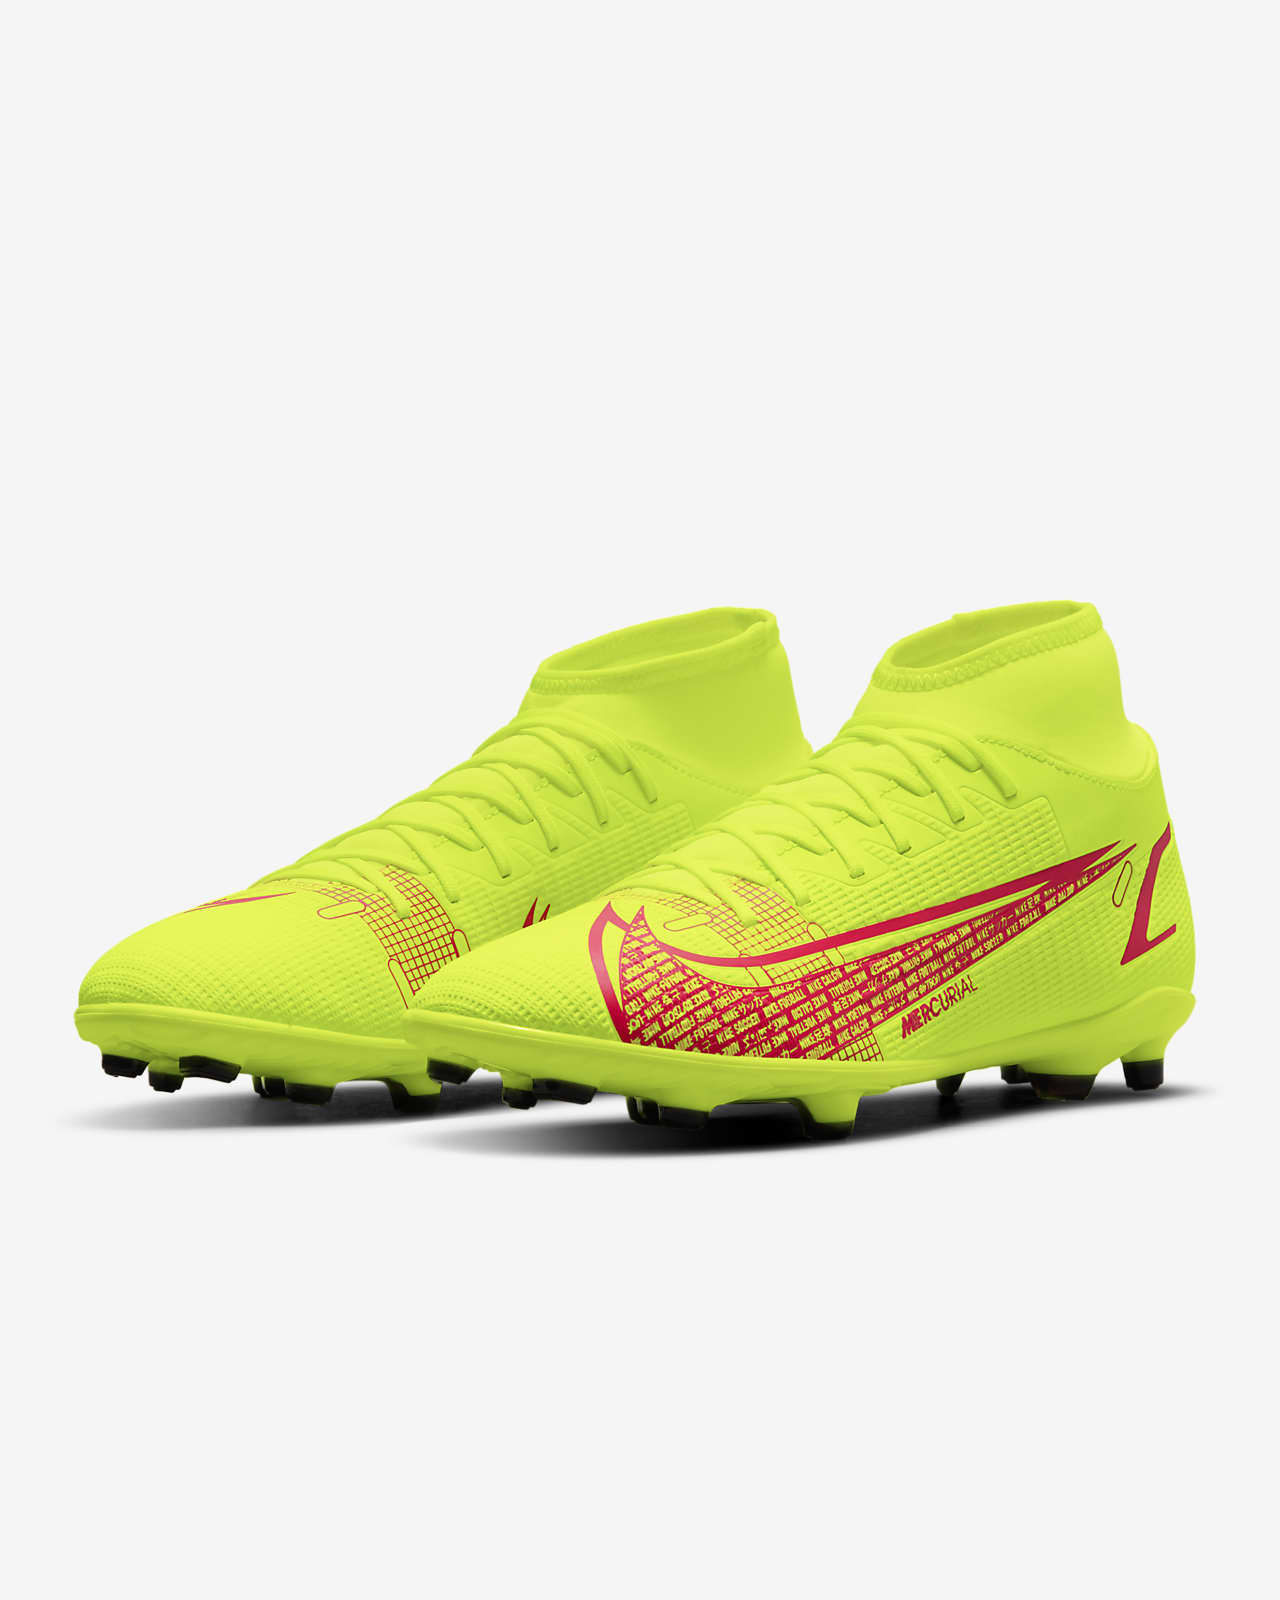 Nike Mercurial Superfly 8 Club MG Multi-Ground Soccer Cleat